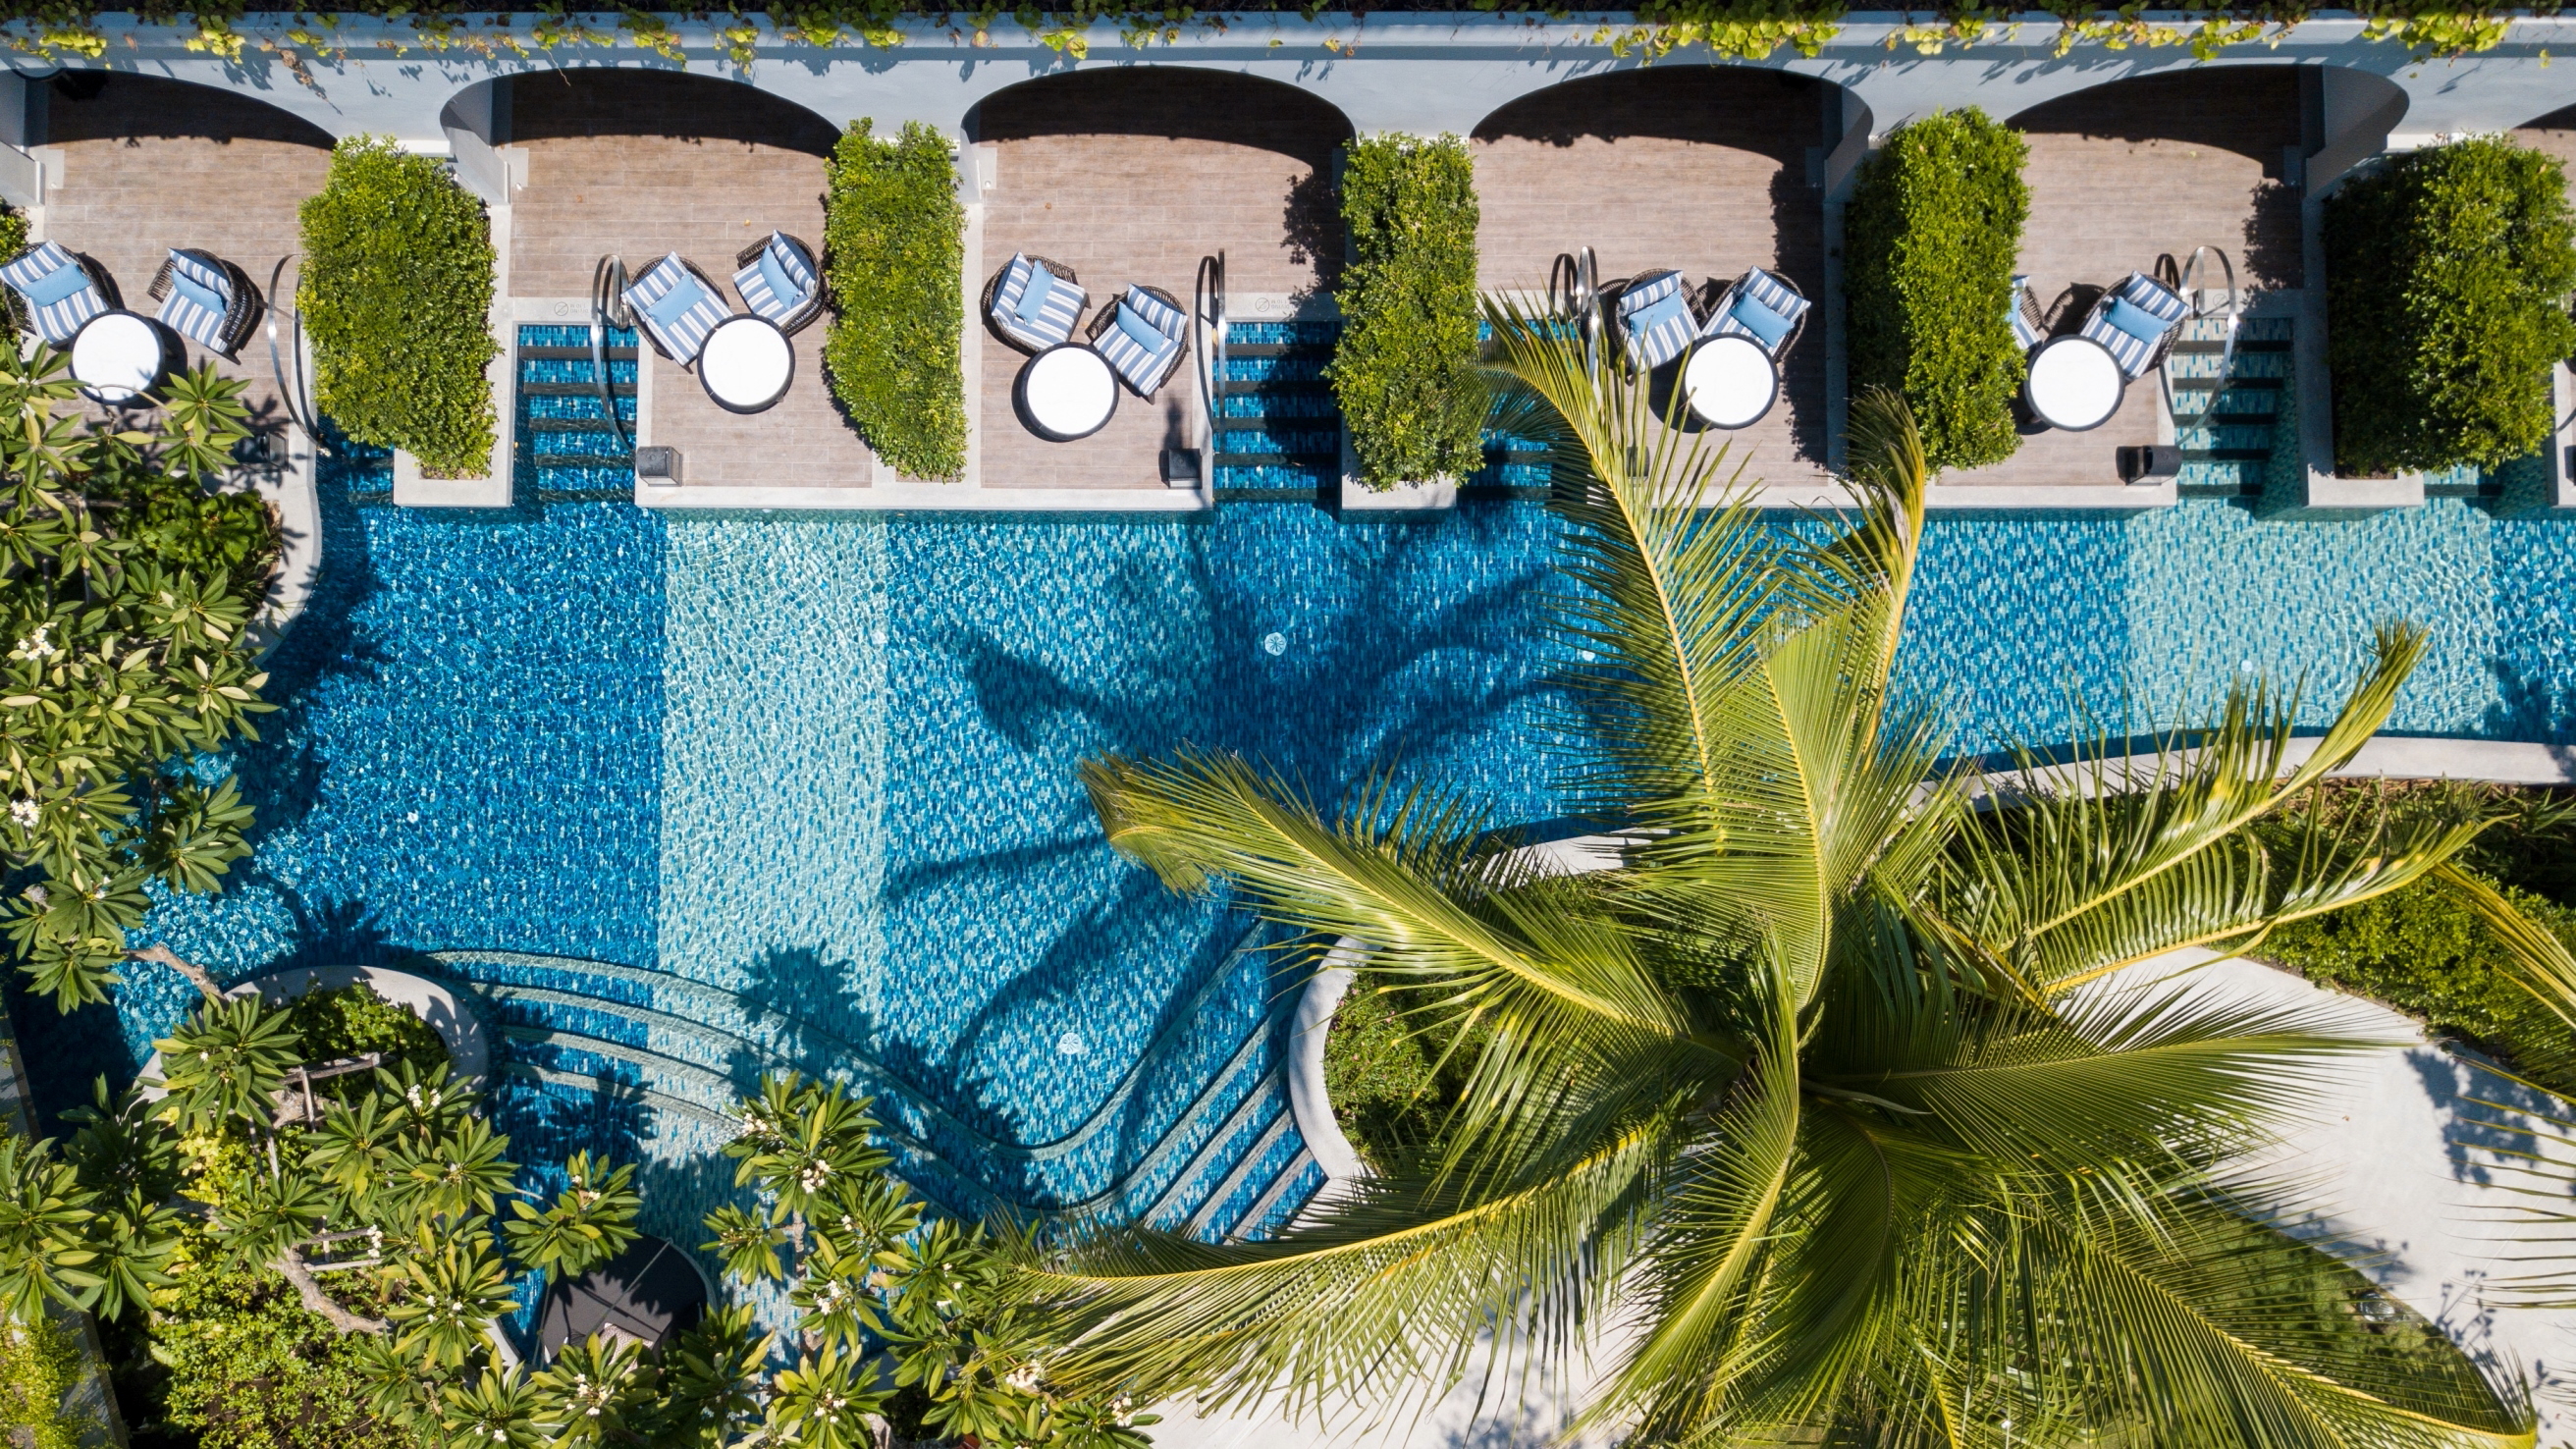 Twenty four ‘The Level Pool Access Rooms’ at the Meliá Samui on Choeng Mon Beach offer guests private terraces that segue to a 700m-long lagoon pool meandering through the resort’s lush grounds like a river. Click to enlarge.